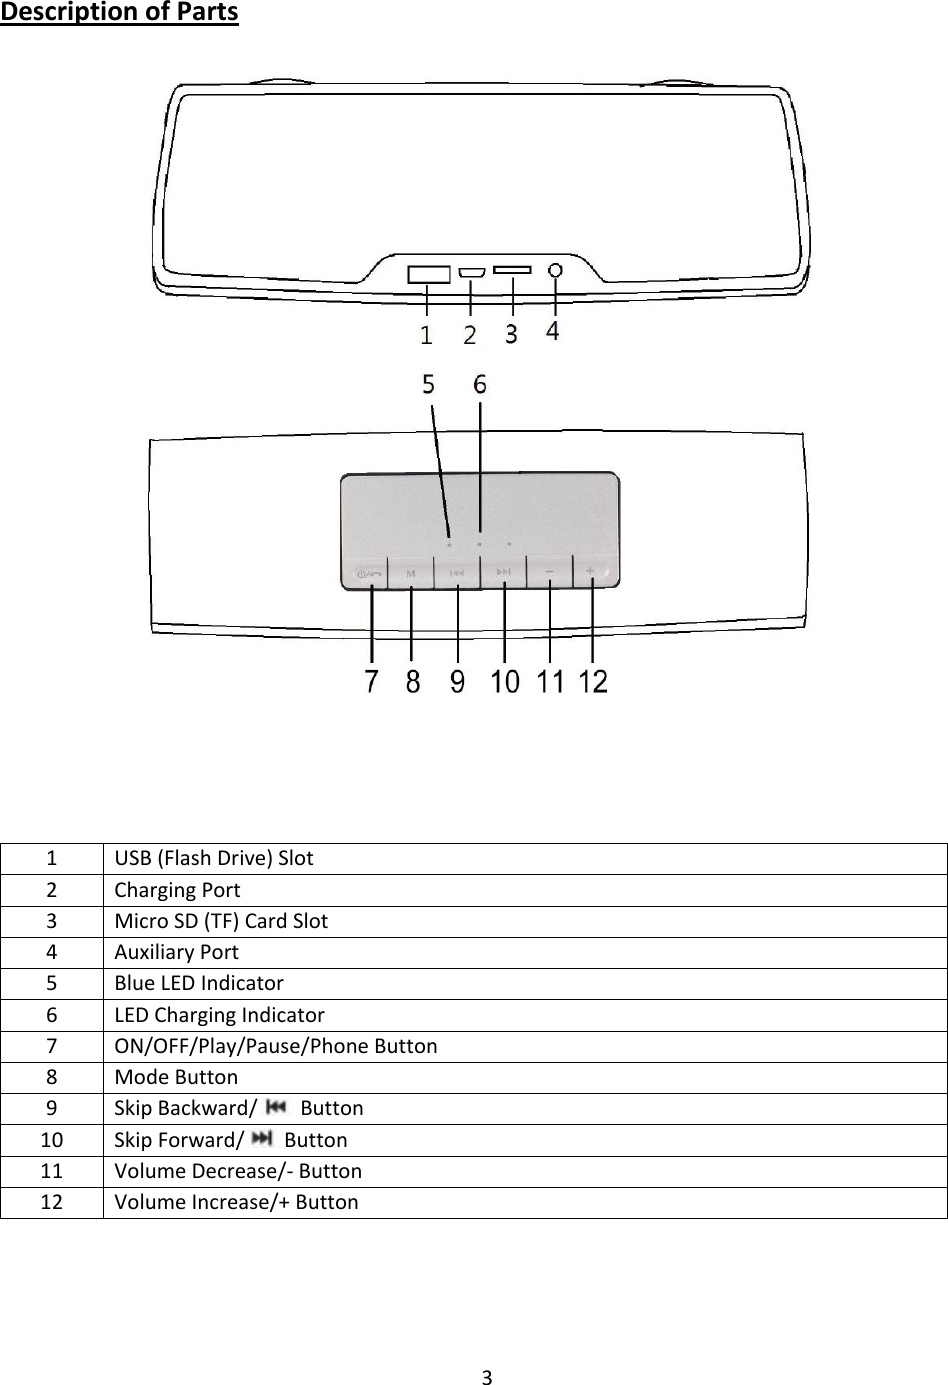 3   Description of Parts        1 USB (Flash Drive) Slot 2 Charging Port 3 Micro SD (TF) Card Slot 4 Auxiliary Port 5 Blue LED Indicator 6 LED Charging Indicator 7 ON/OFF/Play/Pause/Phone Button 8 Mode Button 9 Skip Backward/  Button 10 Skip Forward/  Button 11 Volume Decrease/- Button 12 Volume Increase/+ Button      